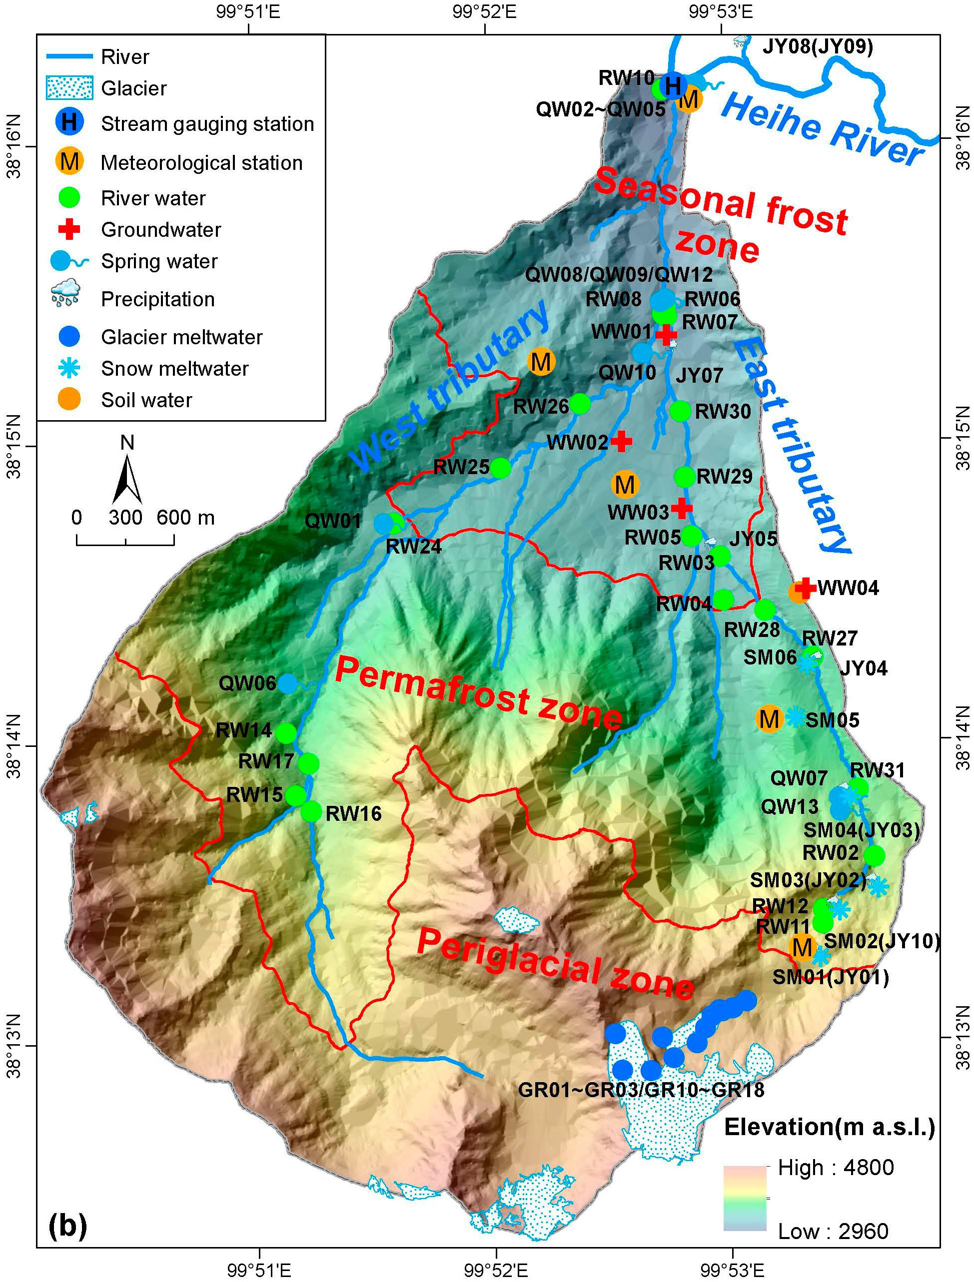 Integrated hydrogeological and hydrogeochemical dataset of an alpine catchment in the northern Qinghai–Tibet Plateau (2012-2020)